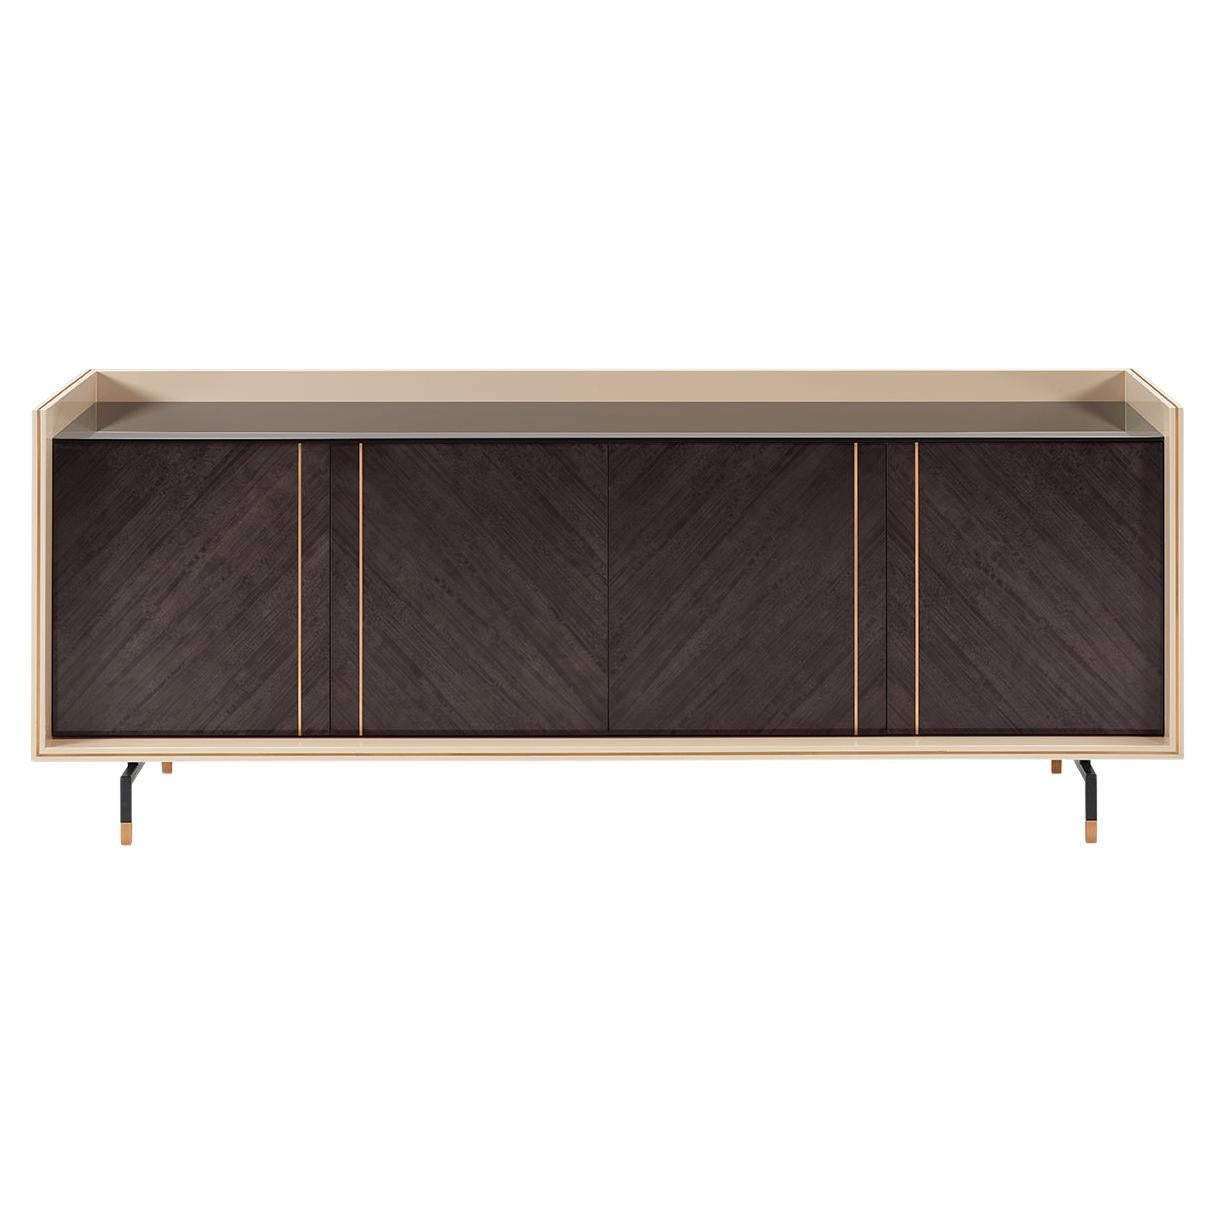 COOPER wood sideboard with Antique Brass details For Sale